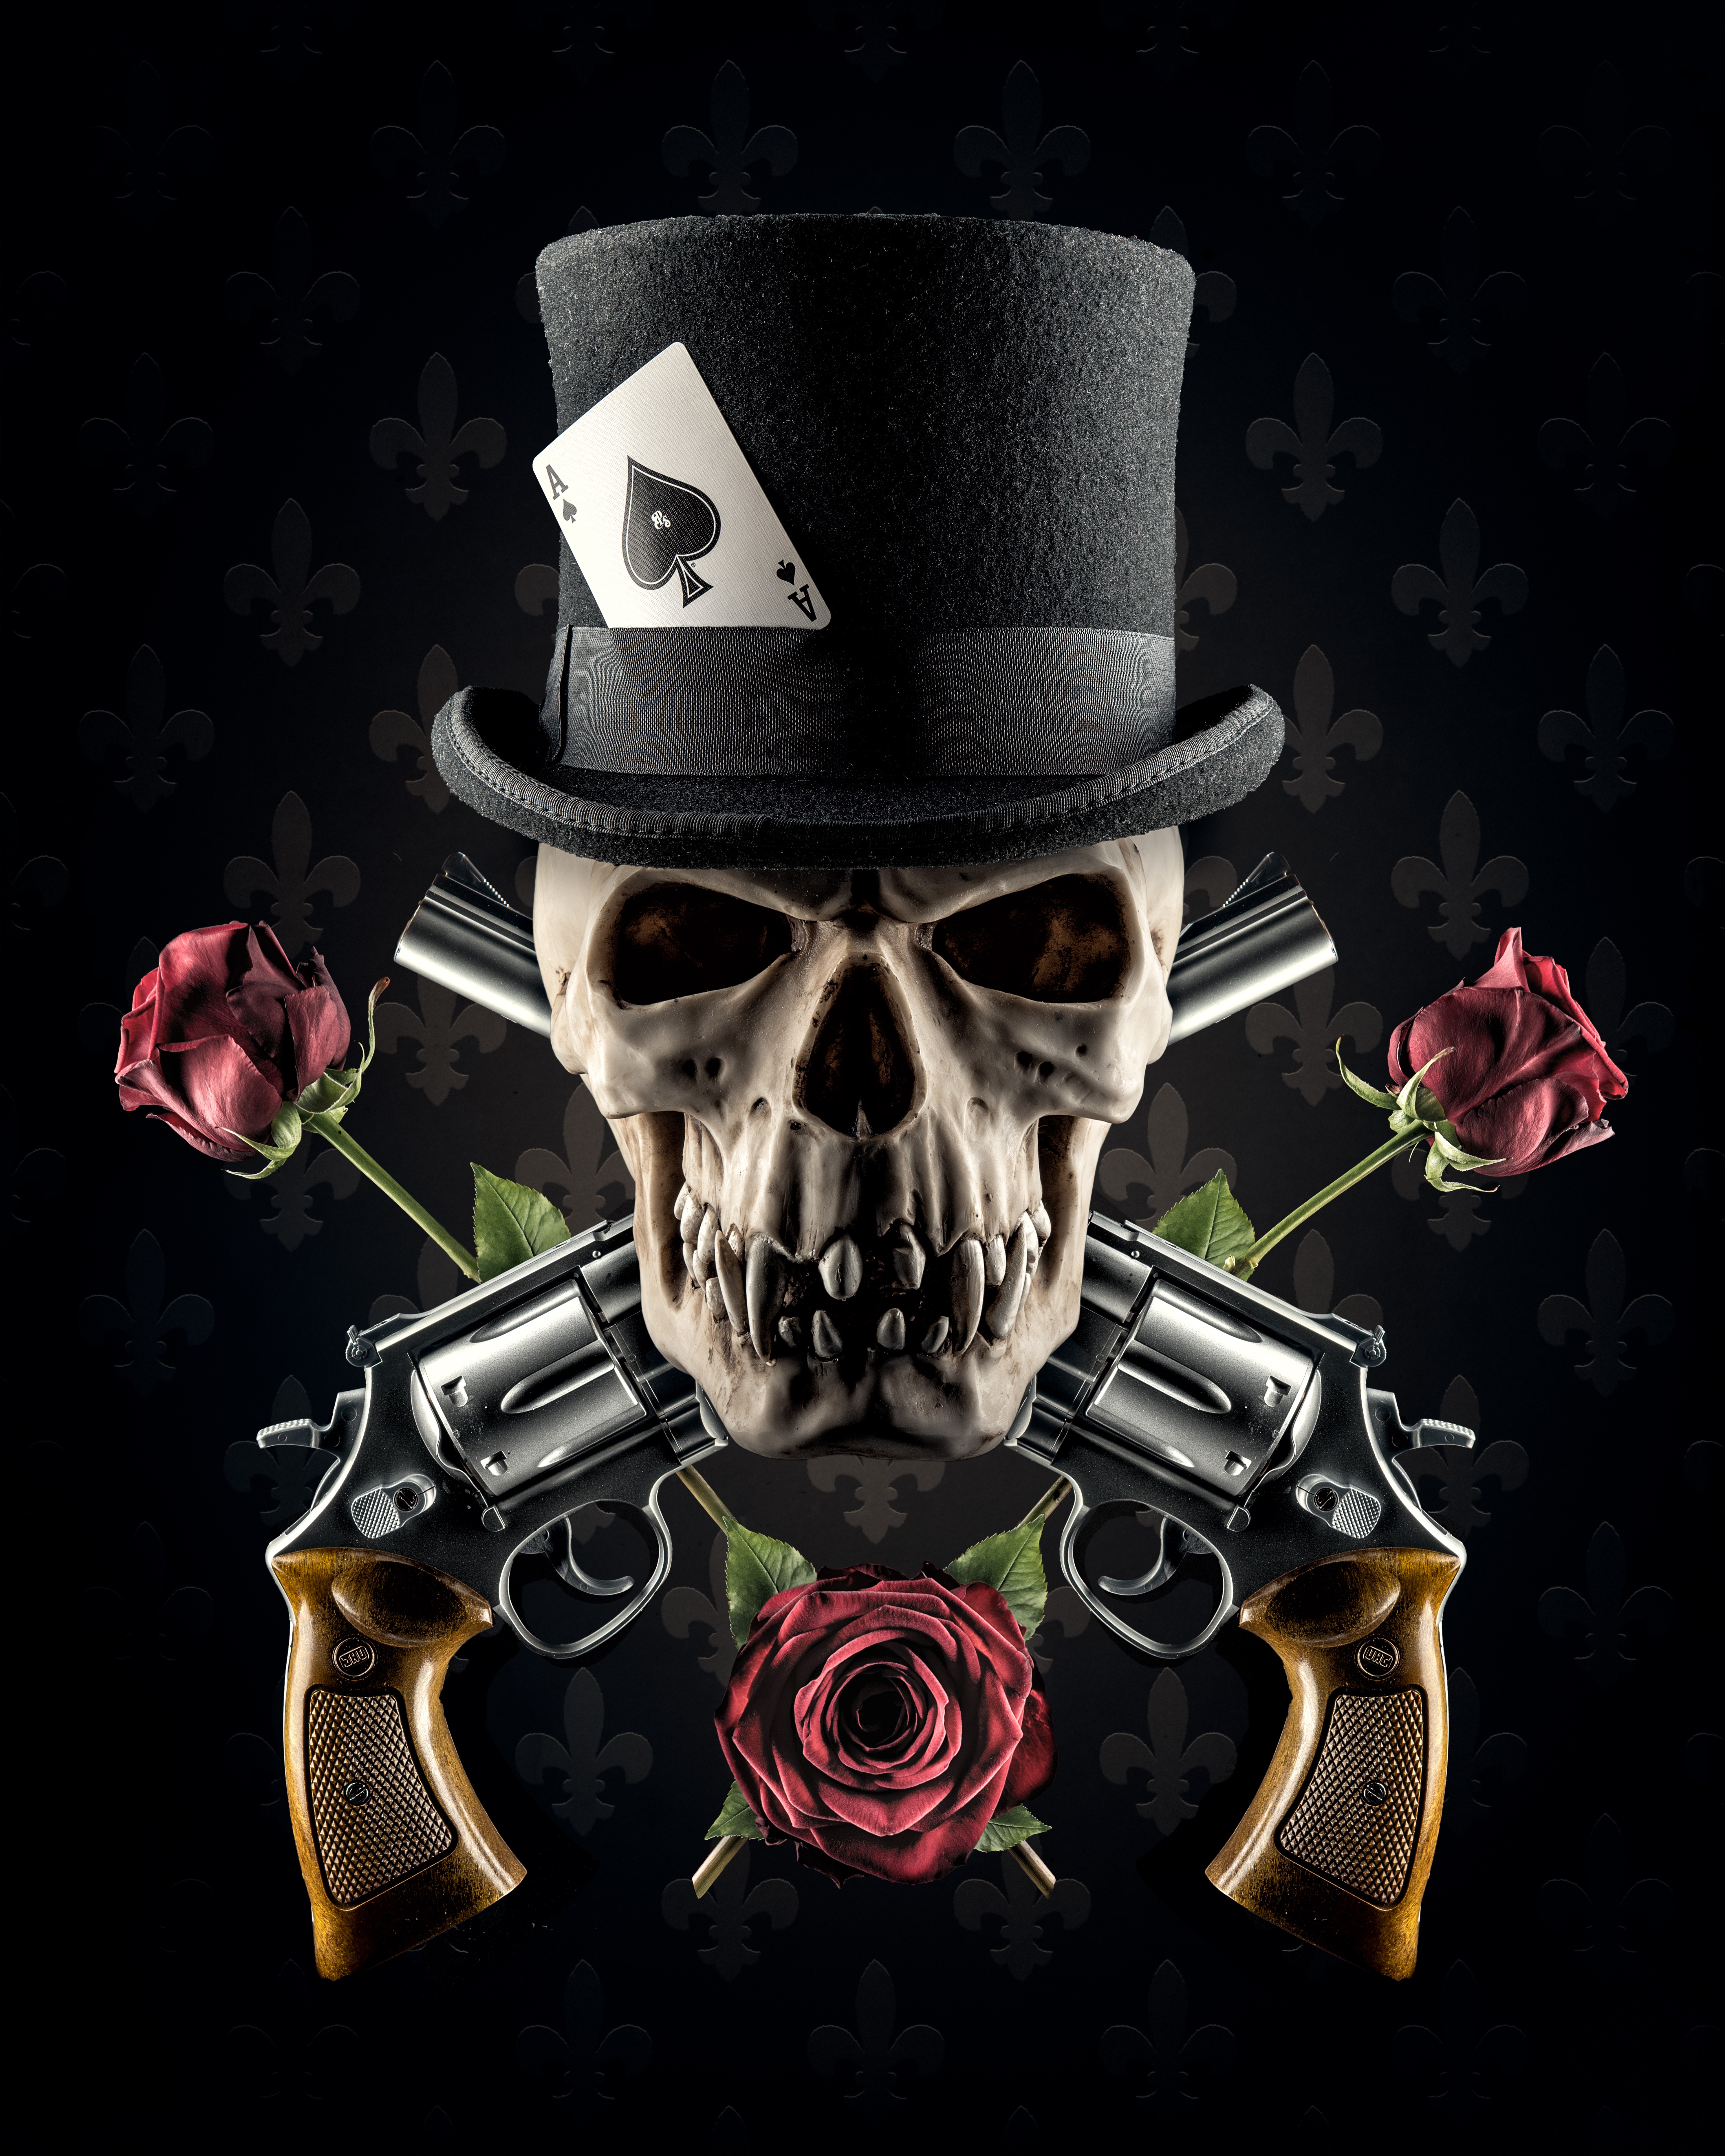 Skull And Roses Wallpapers High Definition  Sdeerwallpaper  Skulls and  roses Sunset wallpaper Skull wallpaper